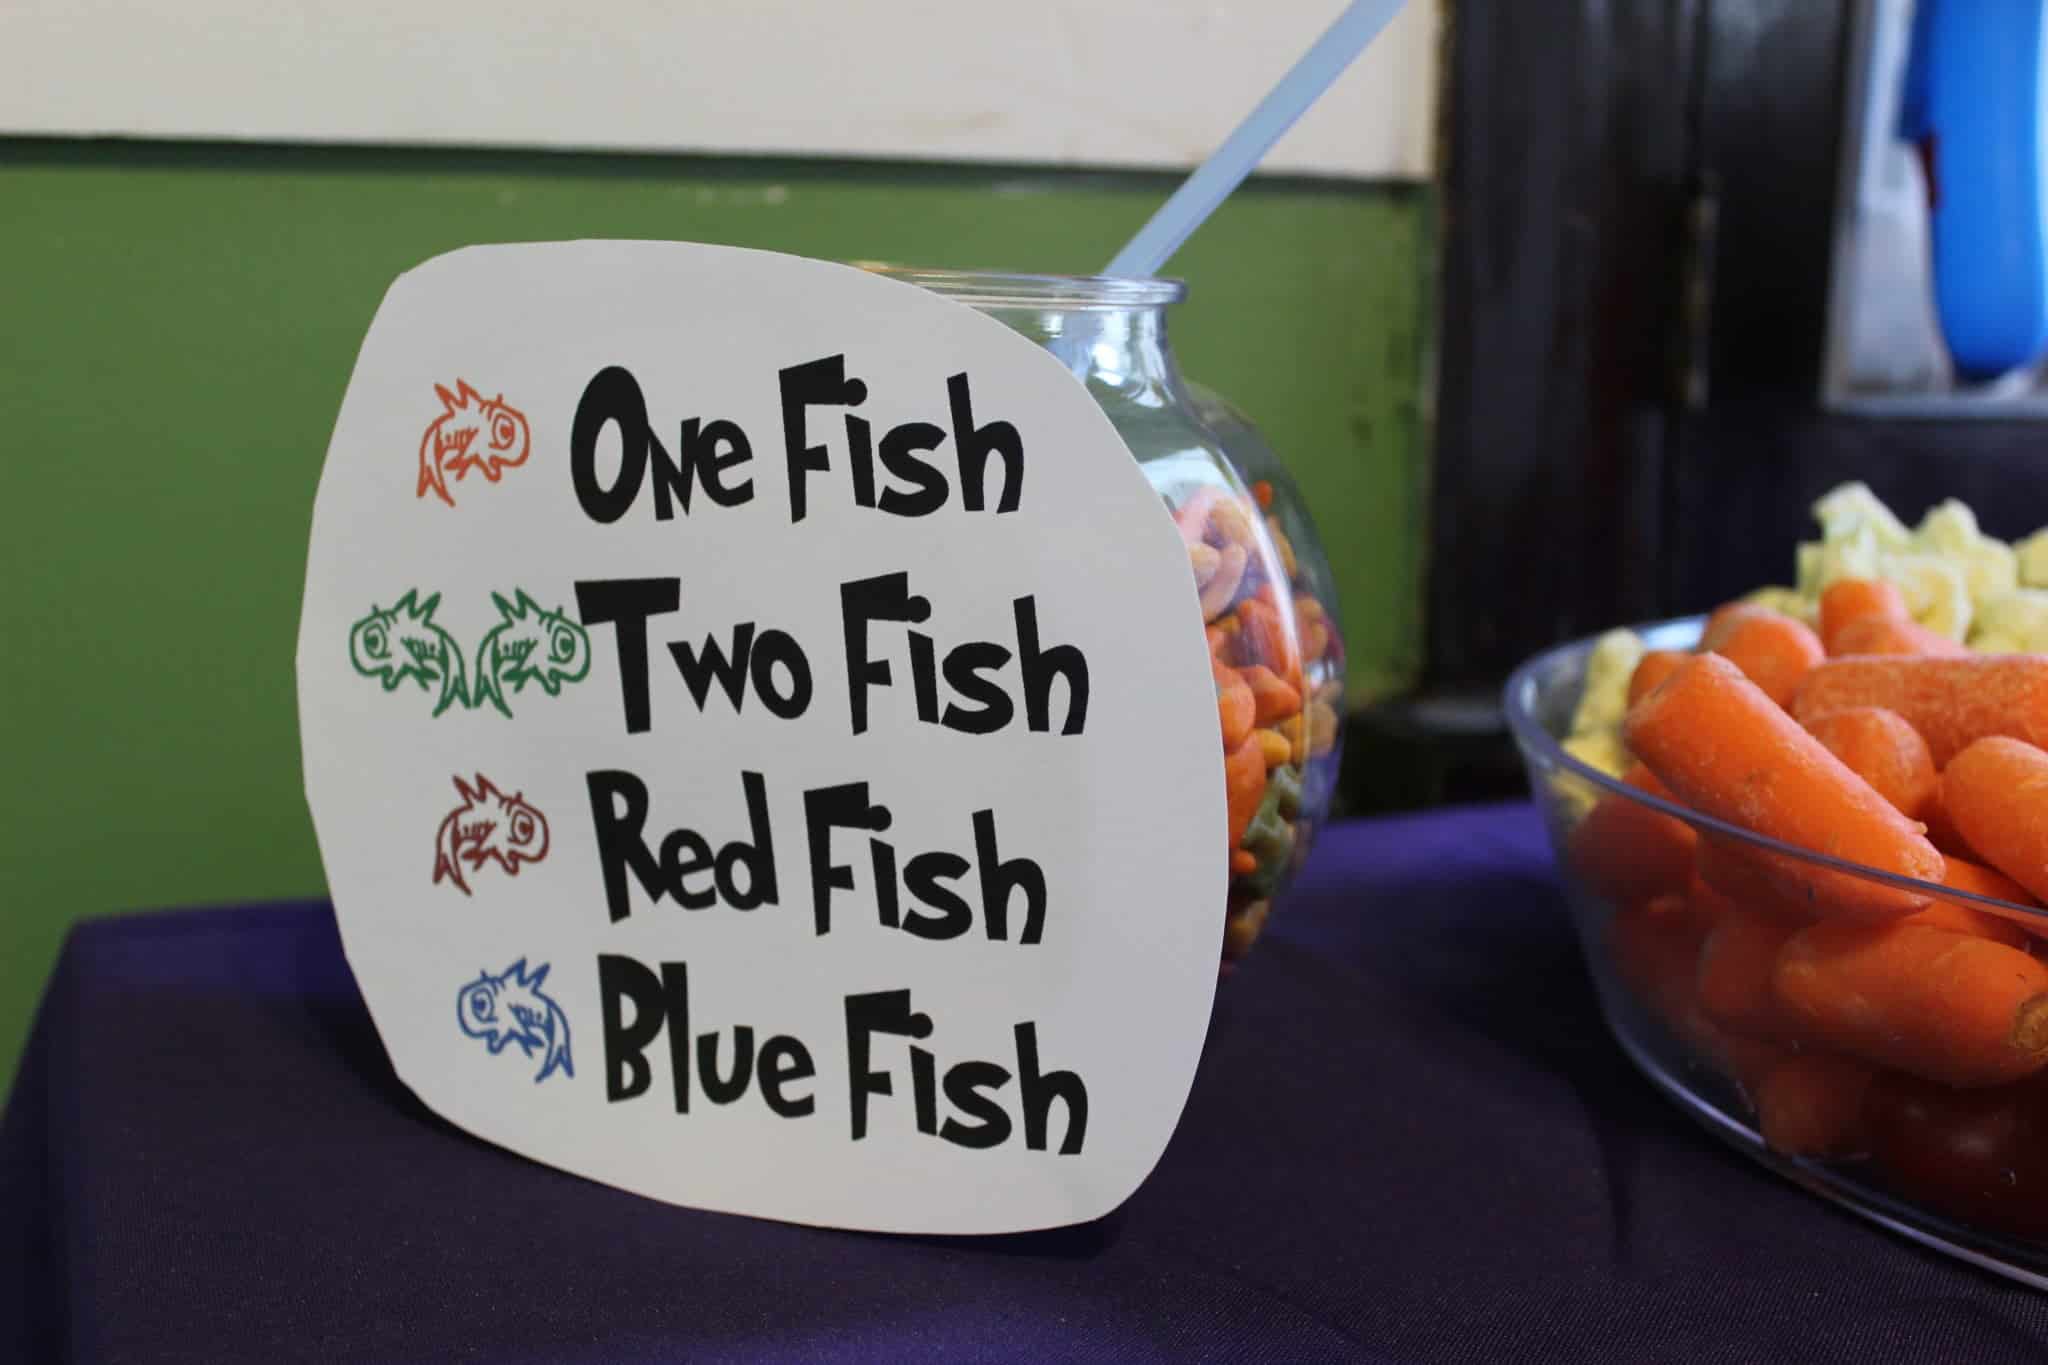 Dr Seuss foods - One fish two fish party food idea